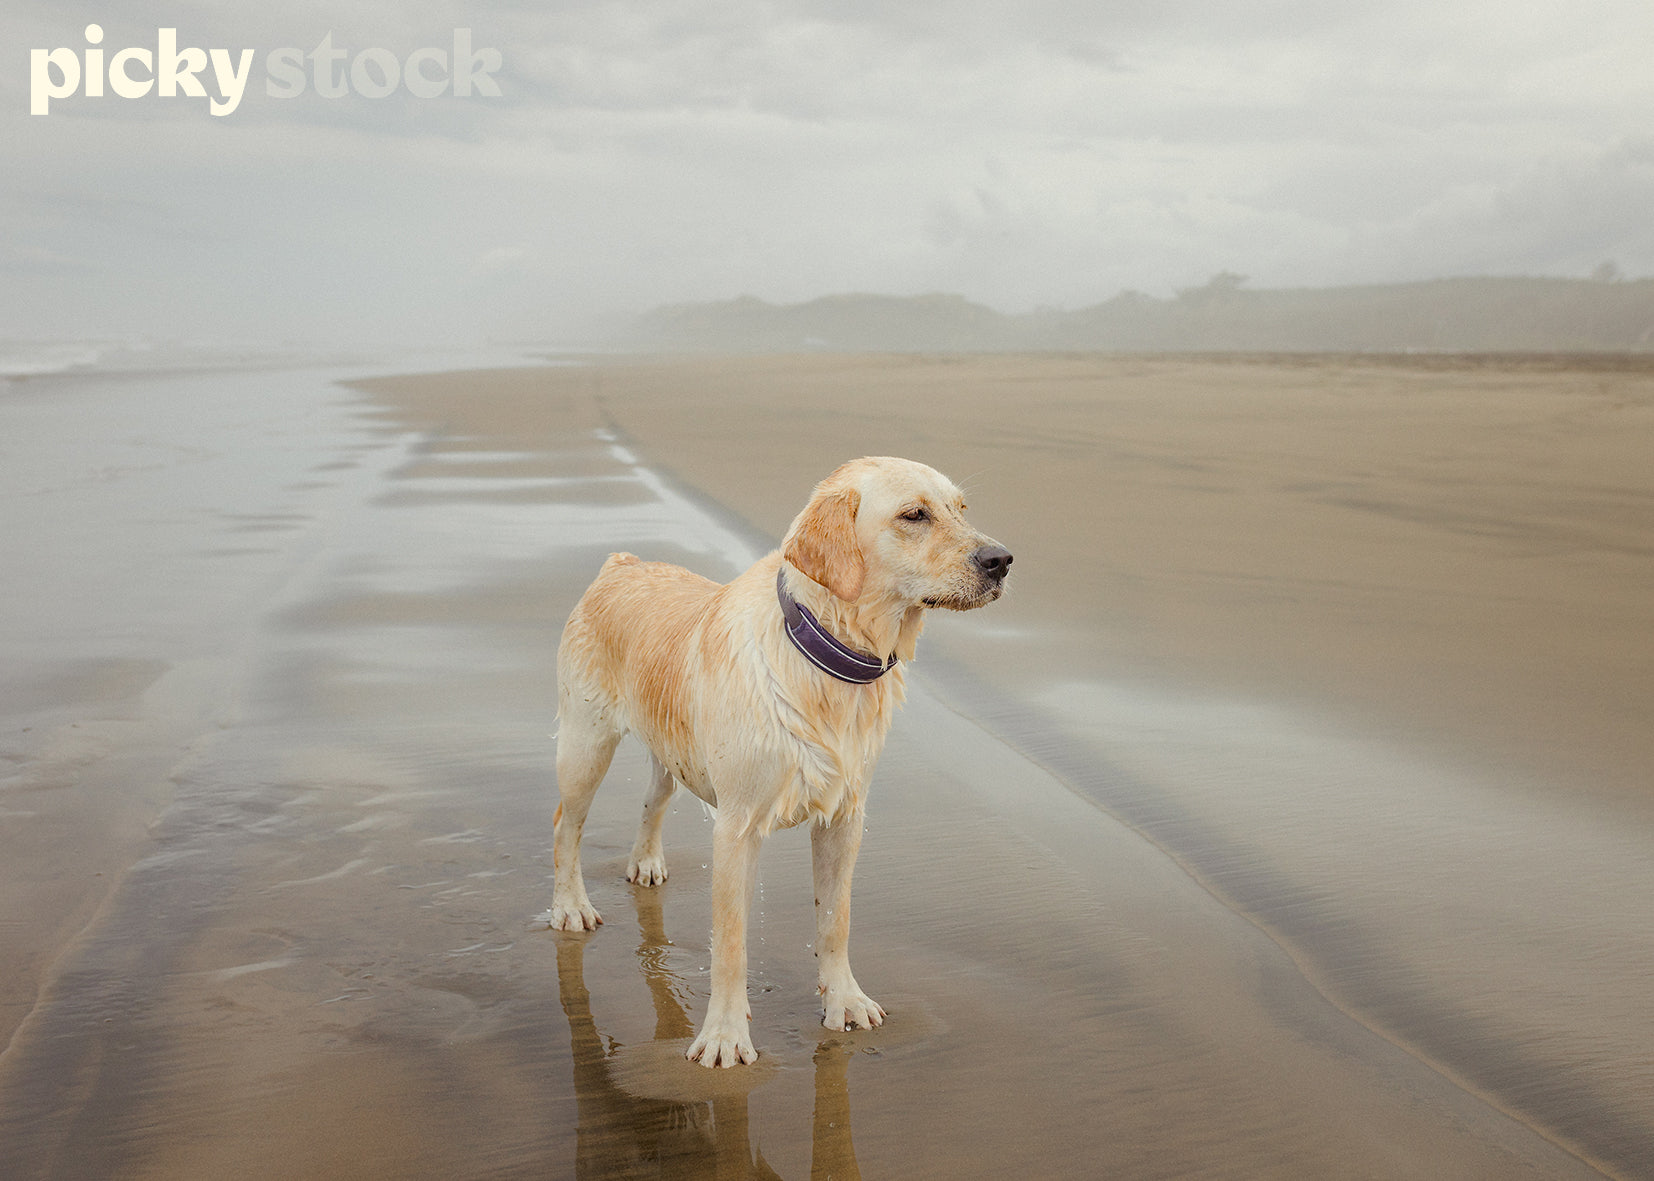 Golden Labrador puppy standing on the wet sand at low tide. golden sand, with shadow of dog visible. Low fog light.